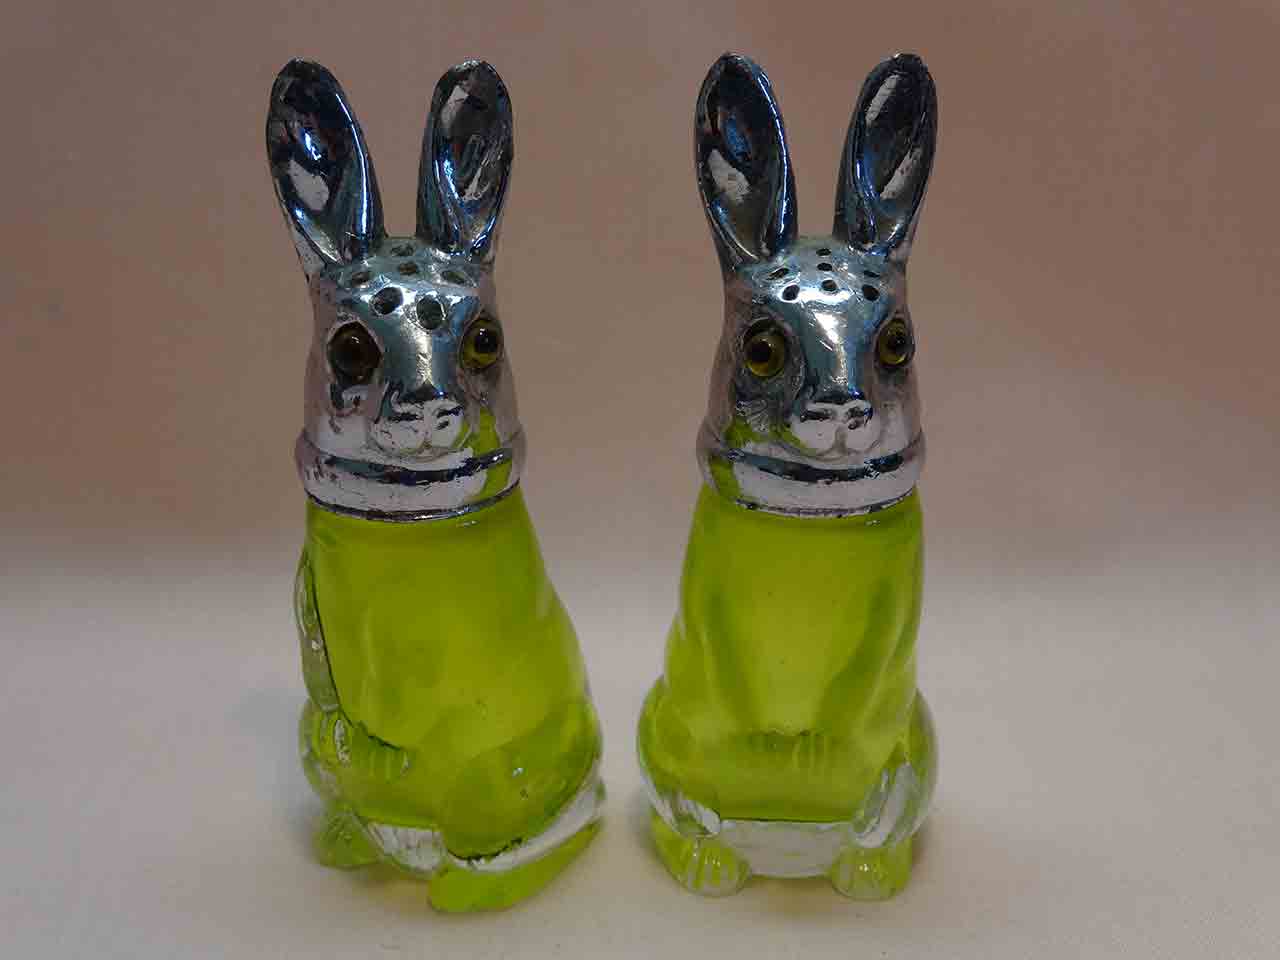 Farber antique glass rabbit salt and pepper shakers